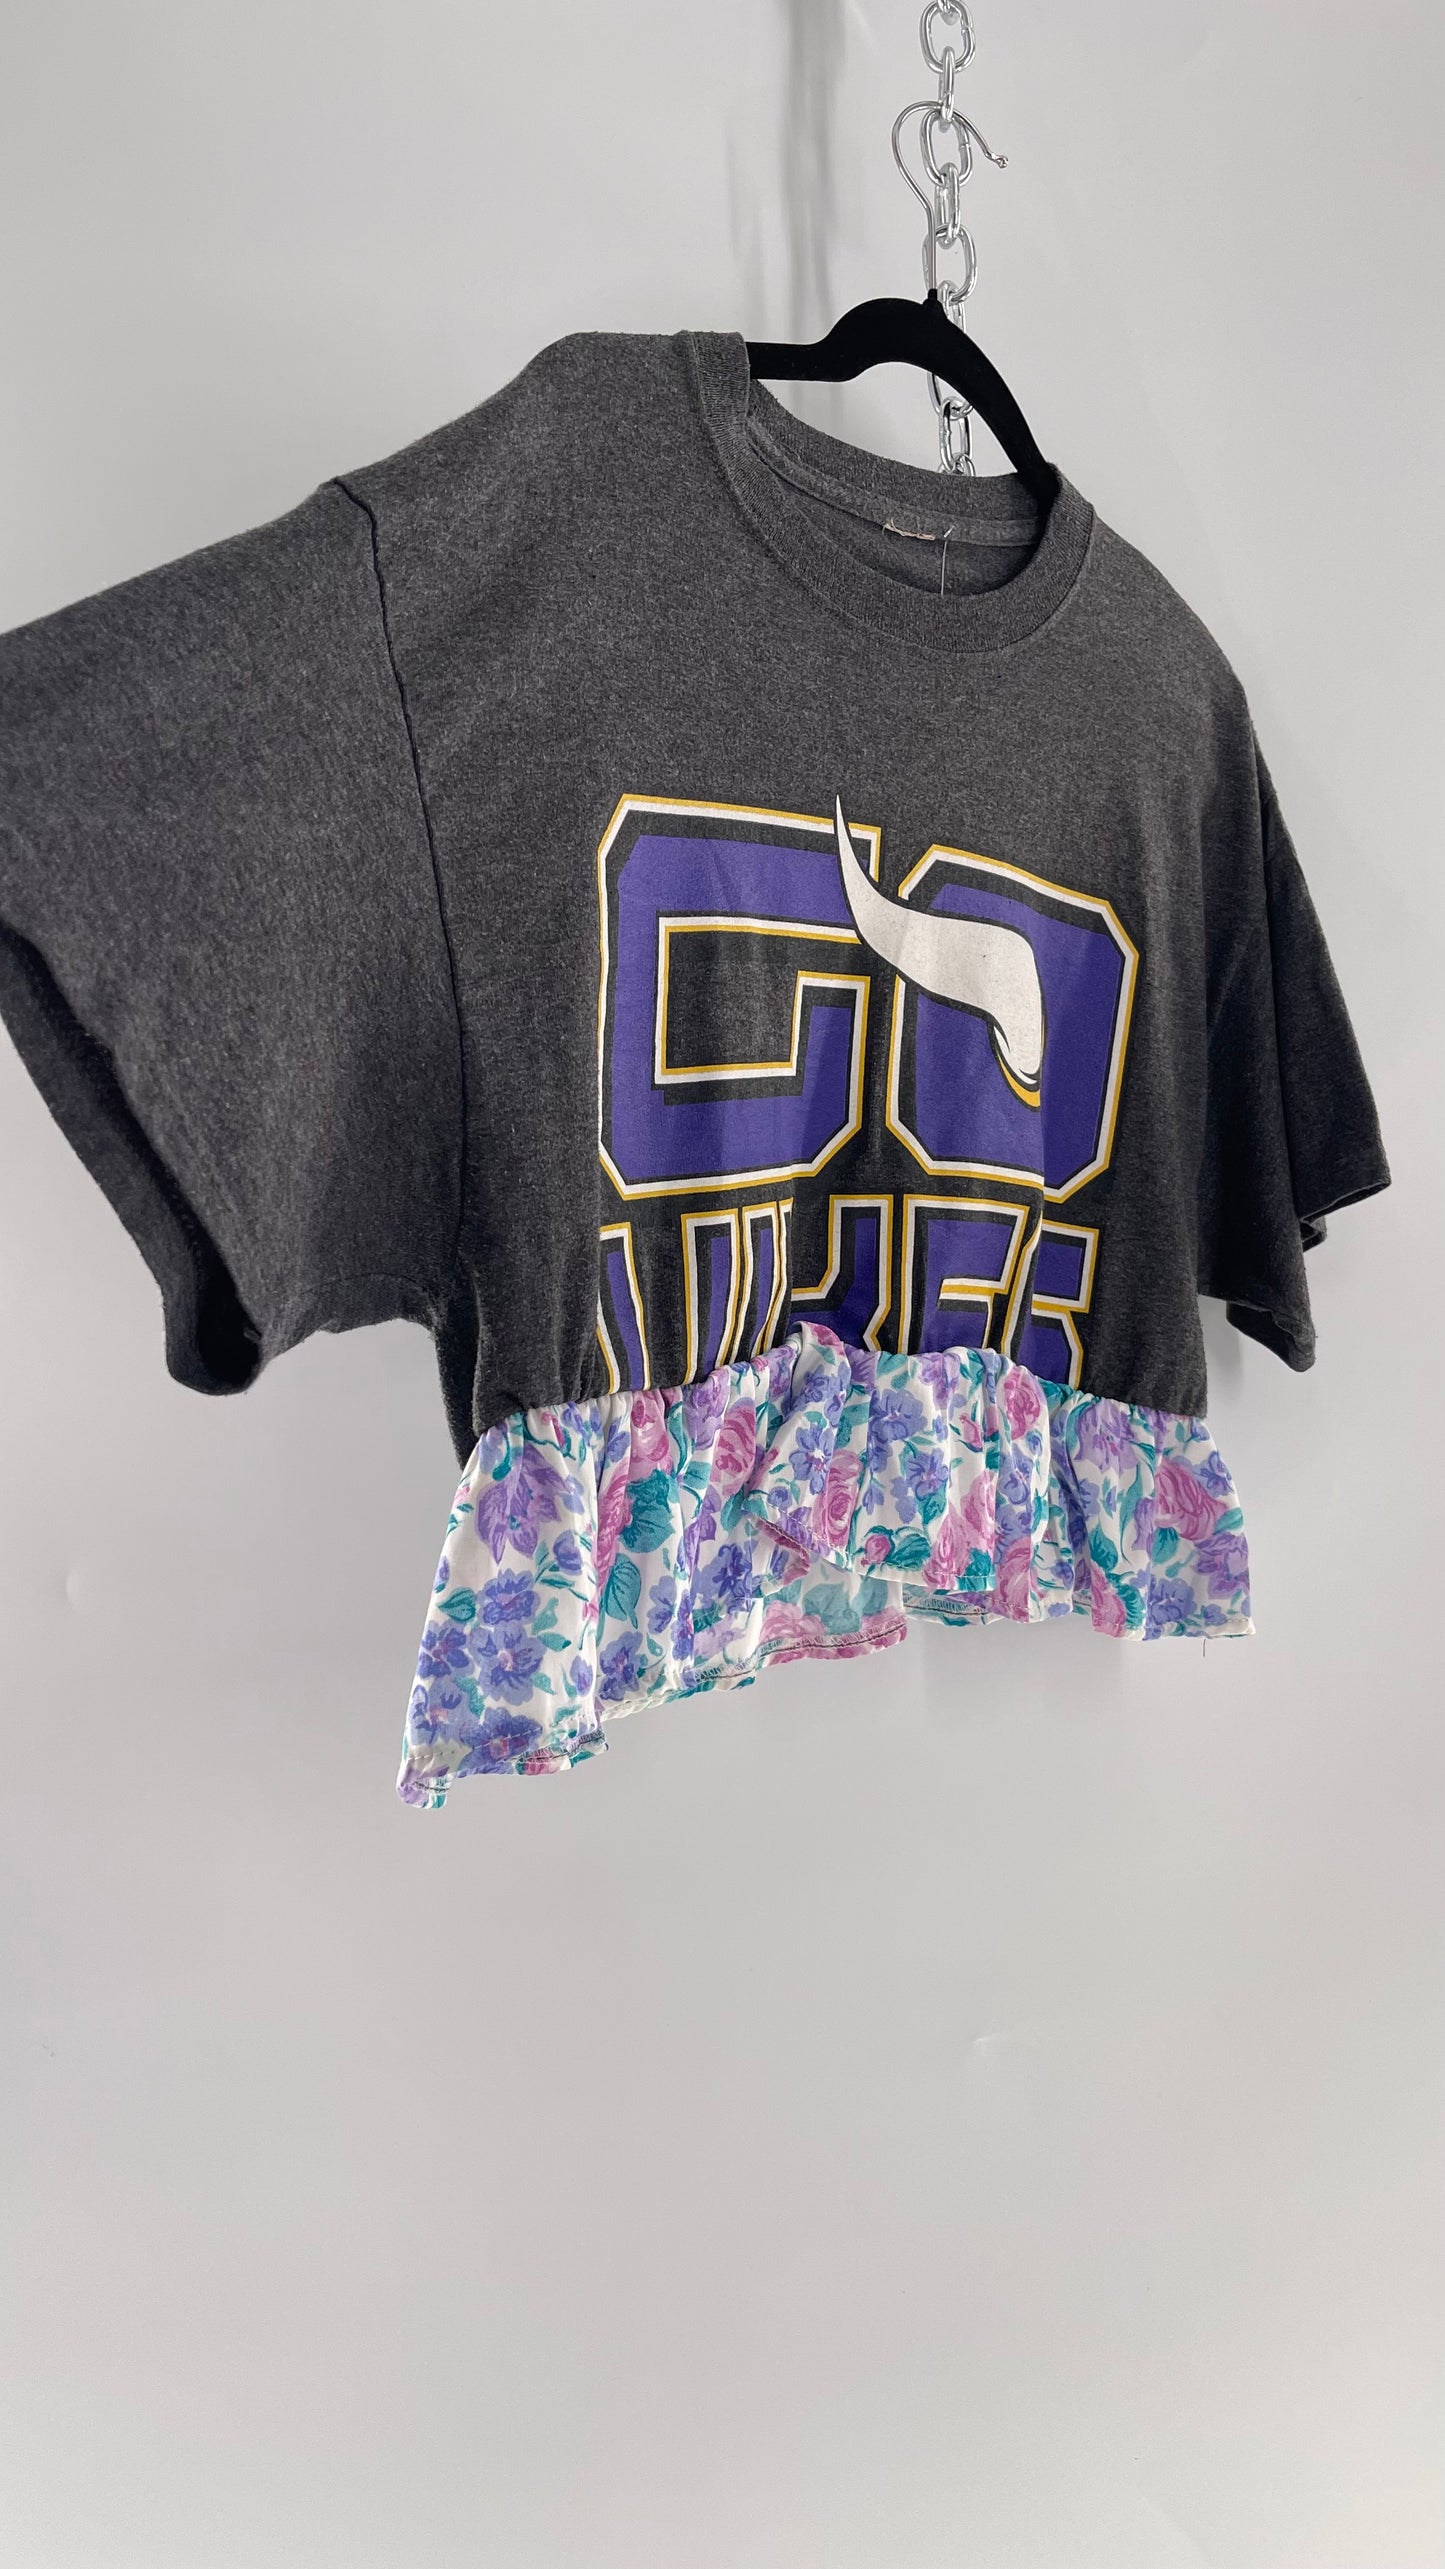 Urban Outfitters Reworked Go Vikings Sports T with Floral 80s Ruffle (M)